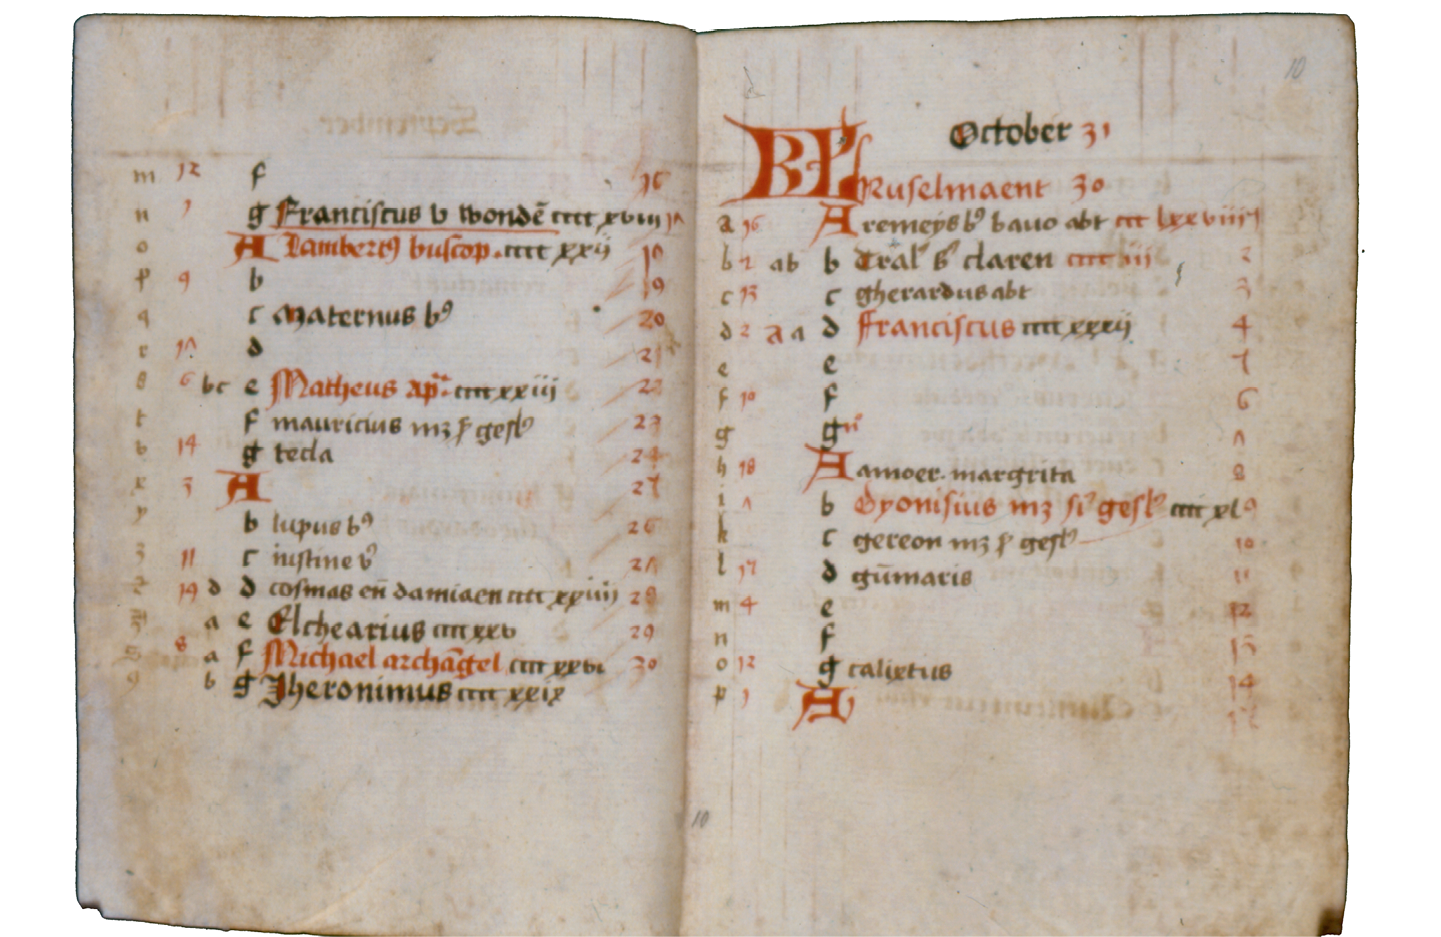 Fig. 80  Calendar in the beghards’ book of hours for the end of September and beginning of October. London, British Library, Add. Ms. 24332, fol. 9v–10r.